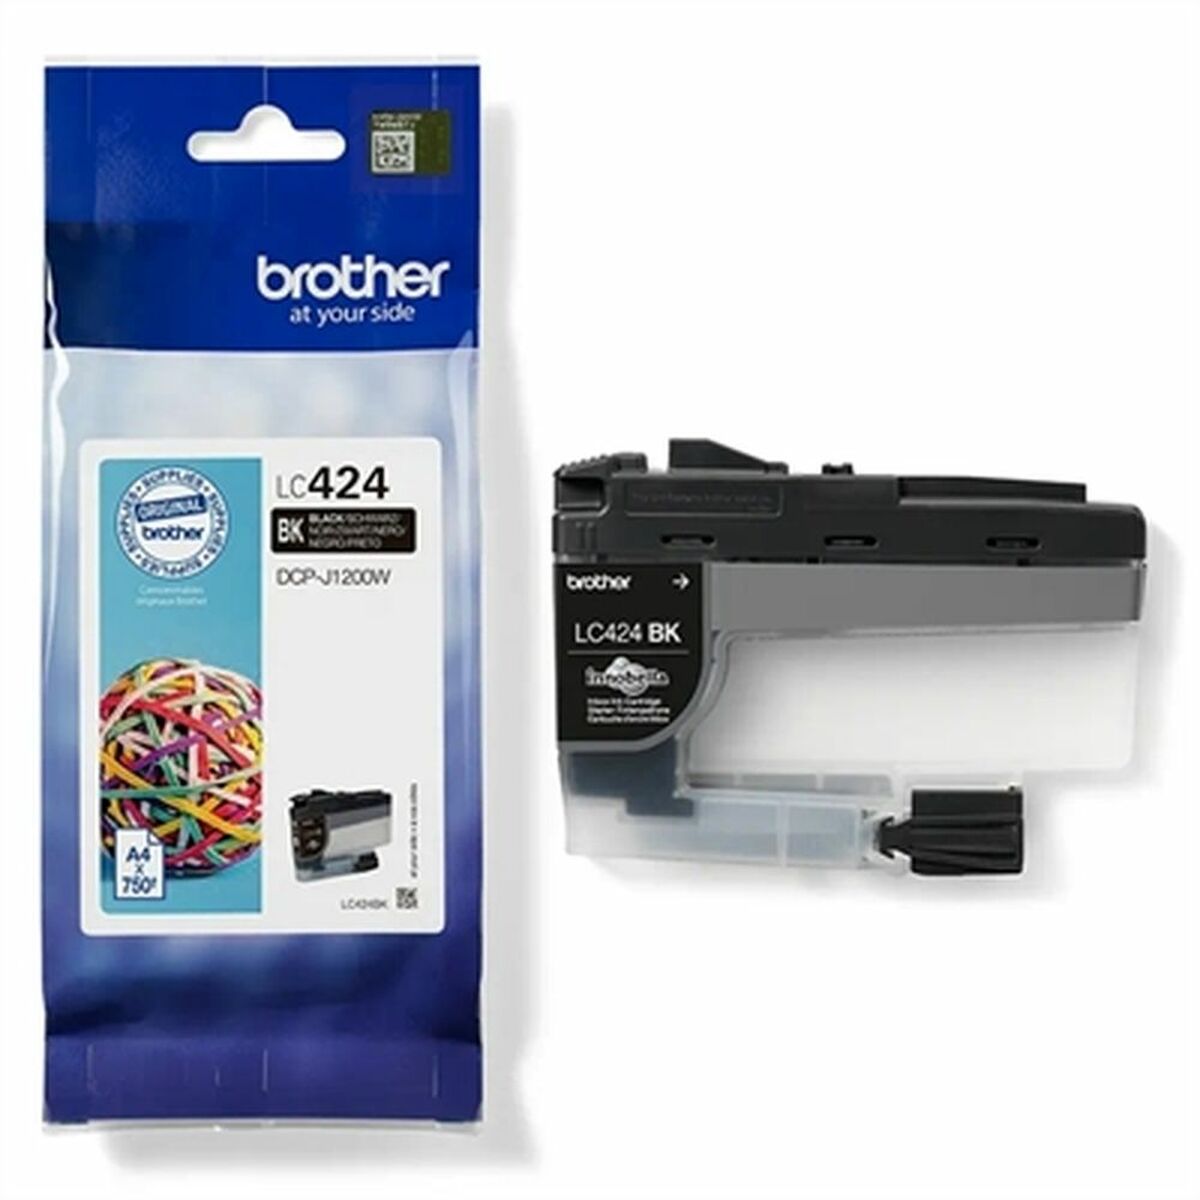 Original Ink Cartridge Brother LC424, Brother, Computing, Printers and accessories, original-ink-cartridge-brother-lc424, Brand_Brother, category-reference-2609, category-reference-2642, category-reference-2874, category-reference-t-19685, category-reference-t-19911, category-reference-t-21377, category-reference-t-25688, Colour_Black, Colour_Cyan, Colour_Magenta, Colour_Yellow, Condition_NEW, office, Price_20 - 50, Teleworking, vuelta al cole, RiotNook